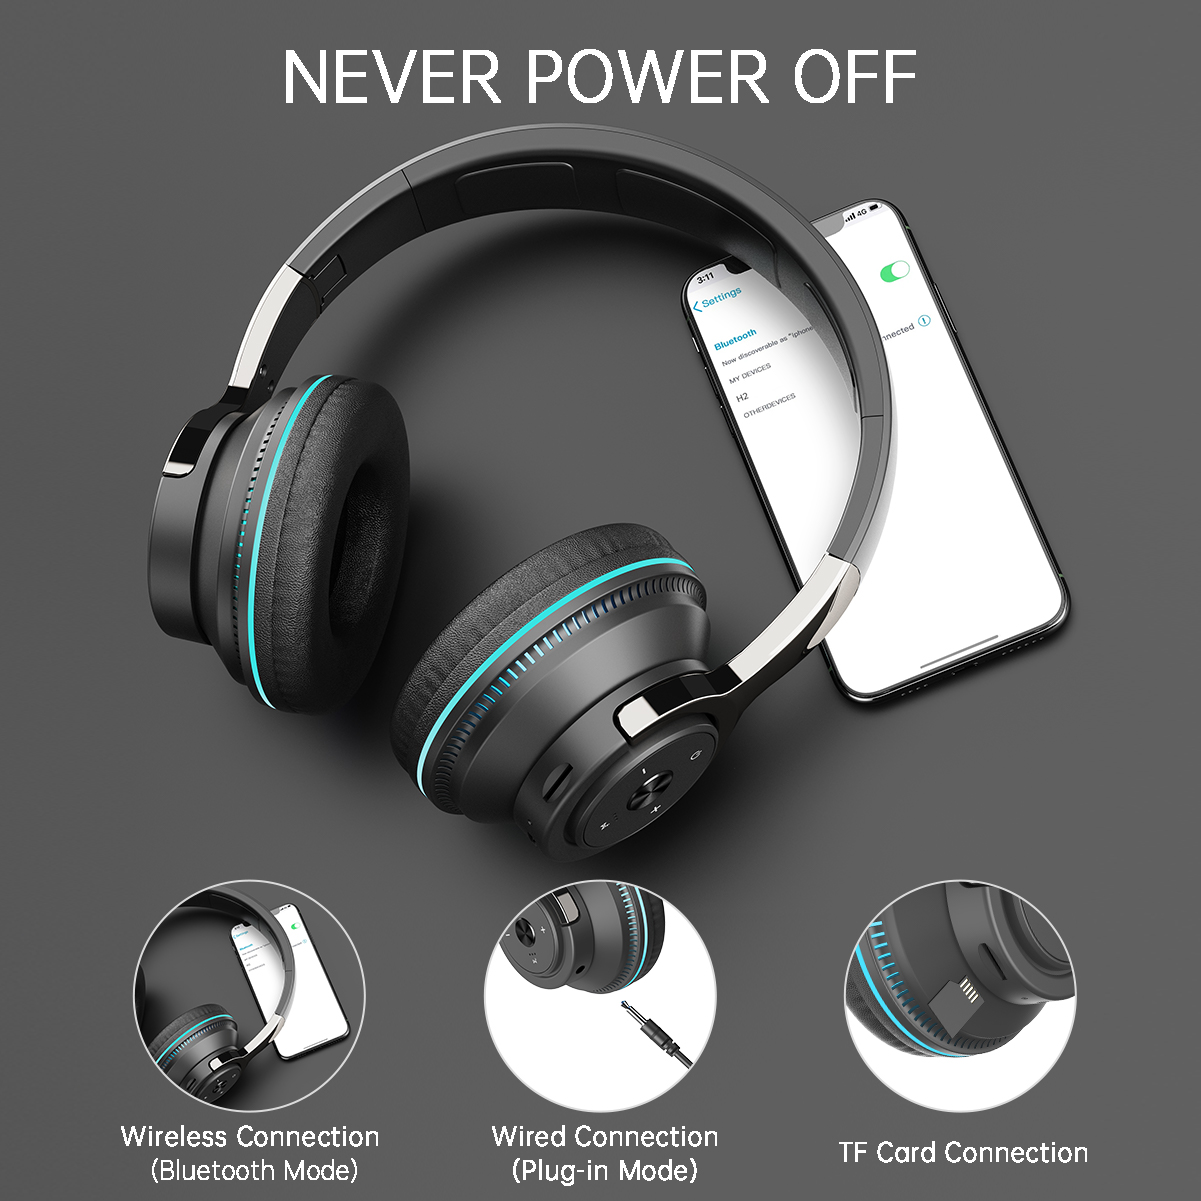 Wireless On-Ear Headphone, Upgrade Bass HiFi Stereo Wireless Heaset, Foldable & Wireless Wired Mode, Noise Isolating Over Ear Headphone w/ Microphone and Volume Control, for Computer Laptop Cell Phone - image 3 of 7